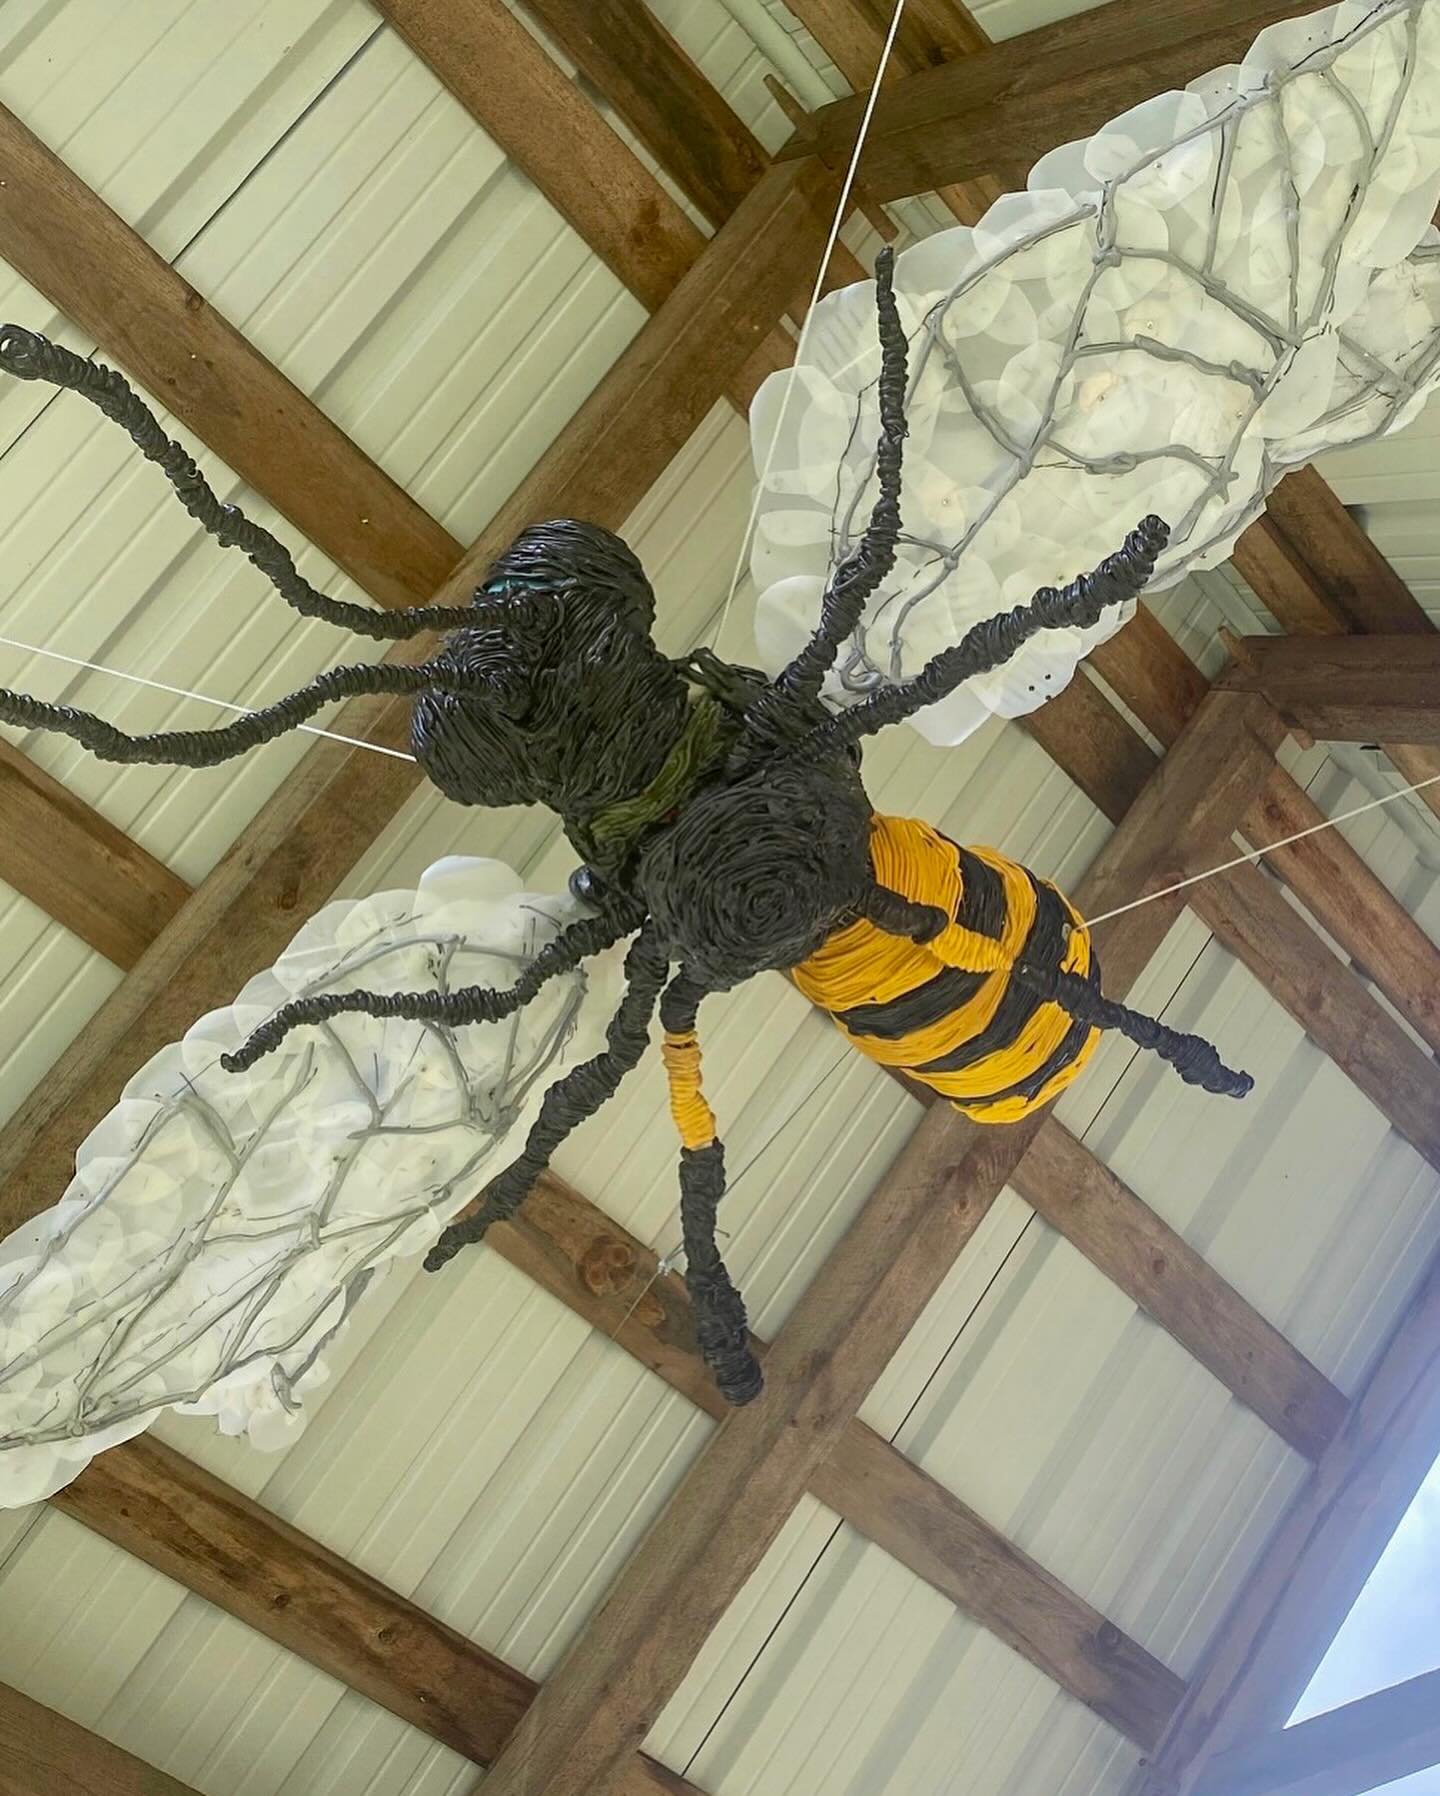 We are buzzing with joy as we introduce you to&hellip; Polly Nator! 🐝 

In partnership with the Haystack Fab Lab, Maine artist Kim Bernard (@kimbernardart), and Art Teacher Sarah Doremus (@teagoblet22) facilitated a week-long plastic recycling works